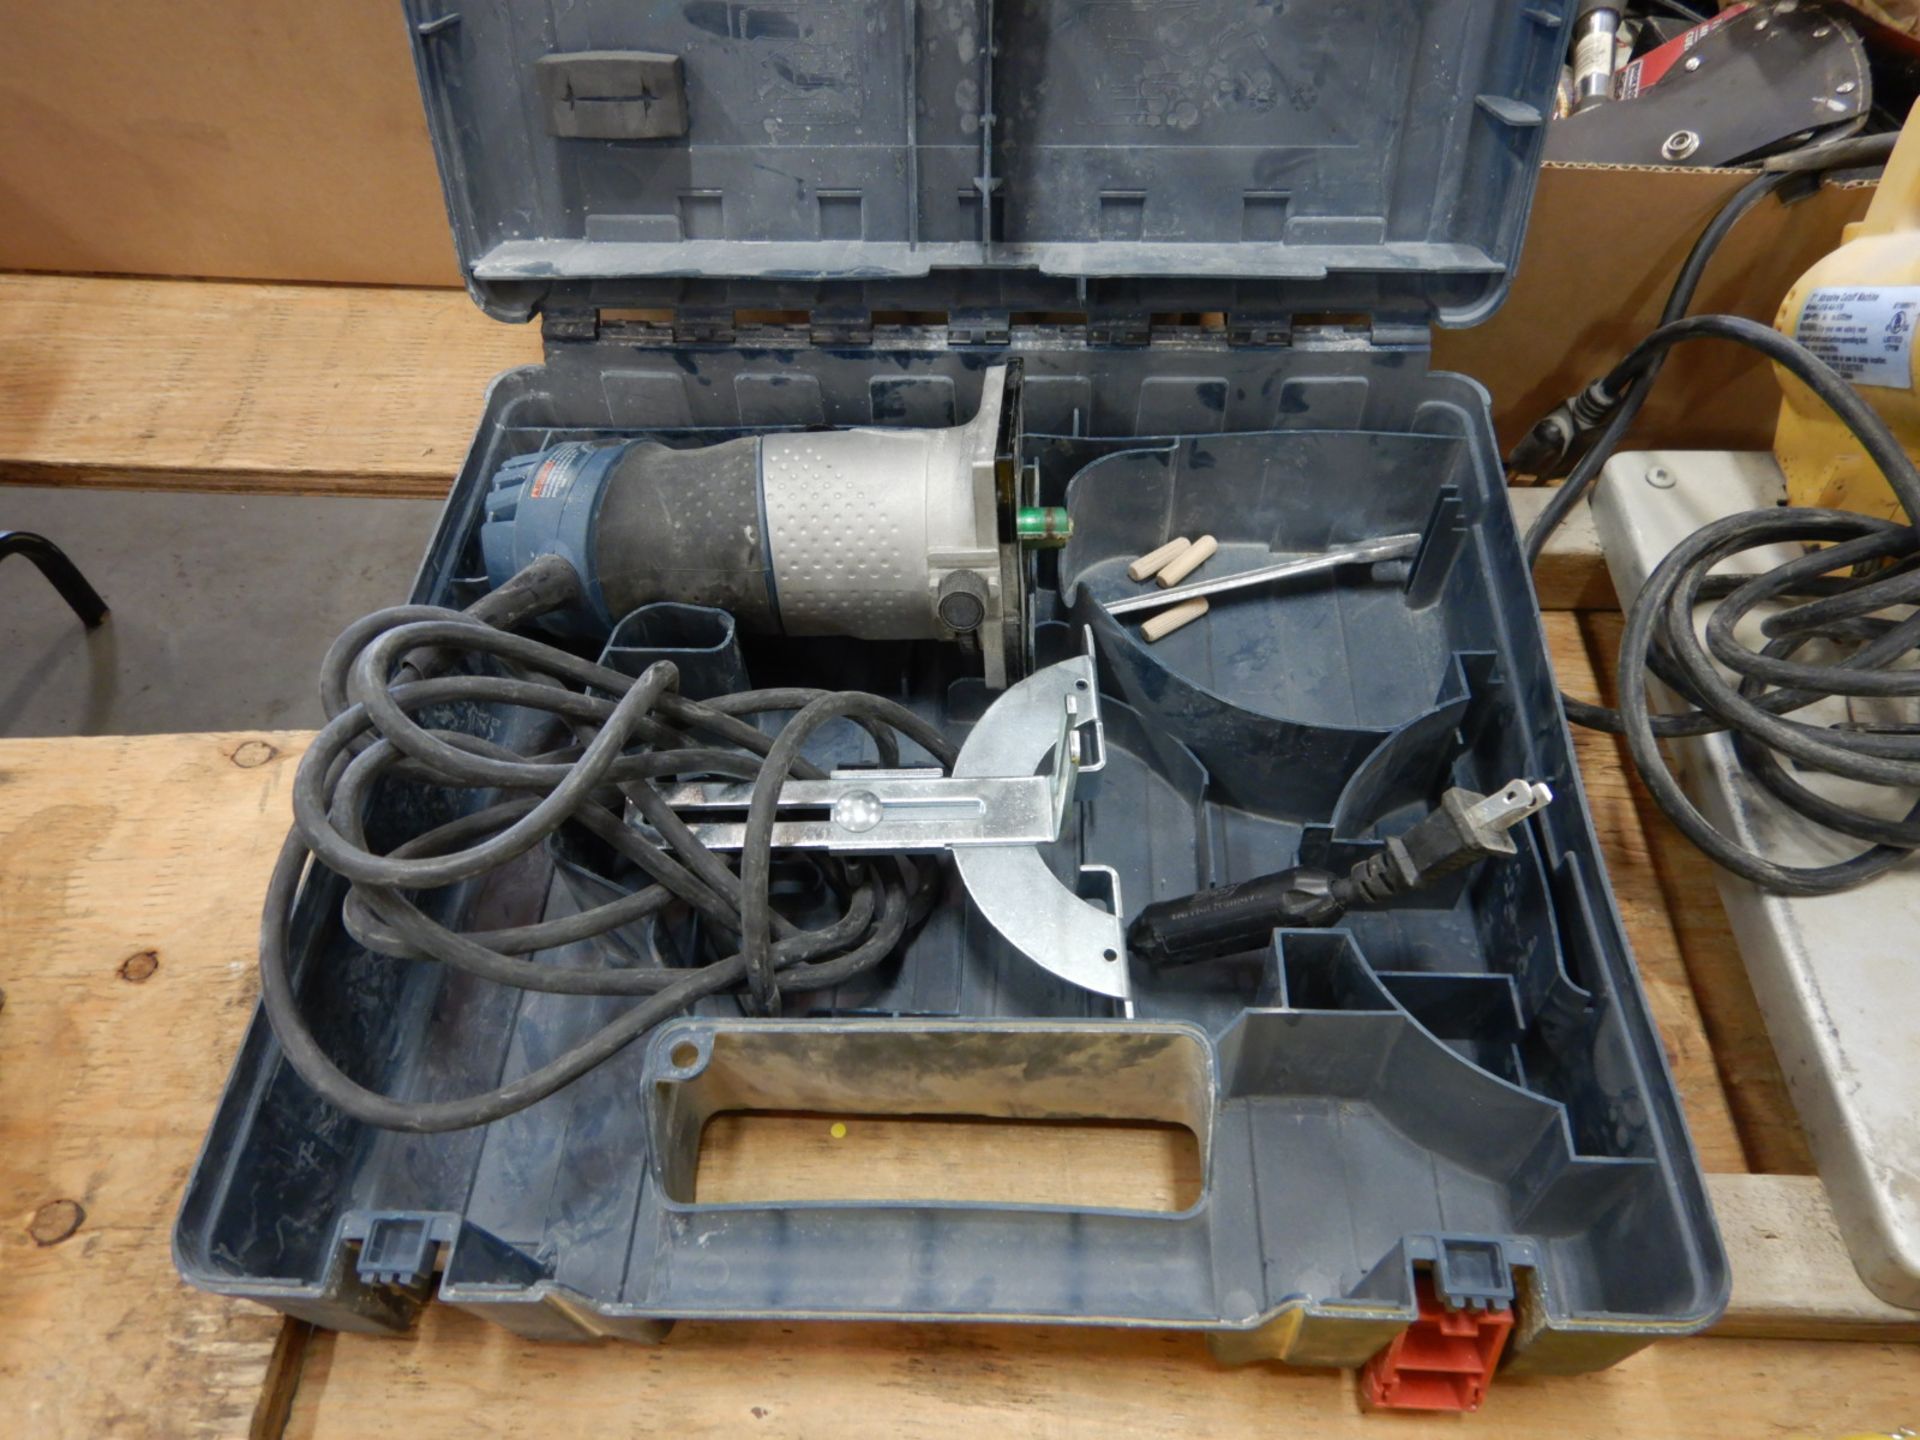 L/O MISC TOOLS INCLUDING BOSCH LAMINATE ROUTER, AIR HOSE, TILE CUTTER, ELECTRIC DRILLS, PAD - Image 2 of 9